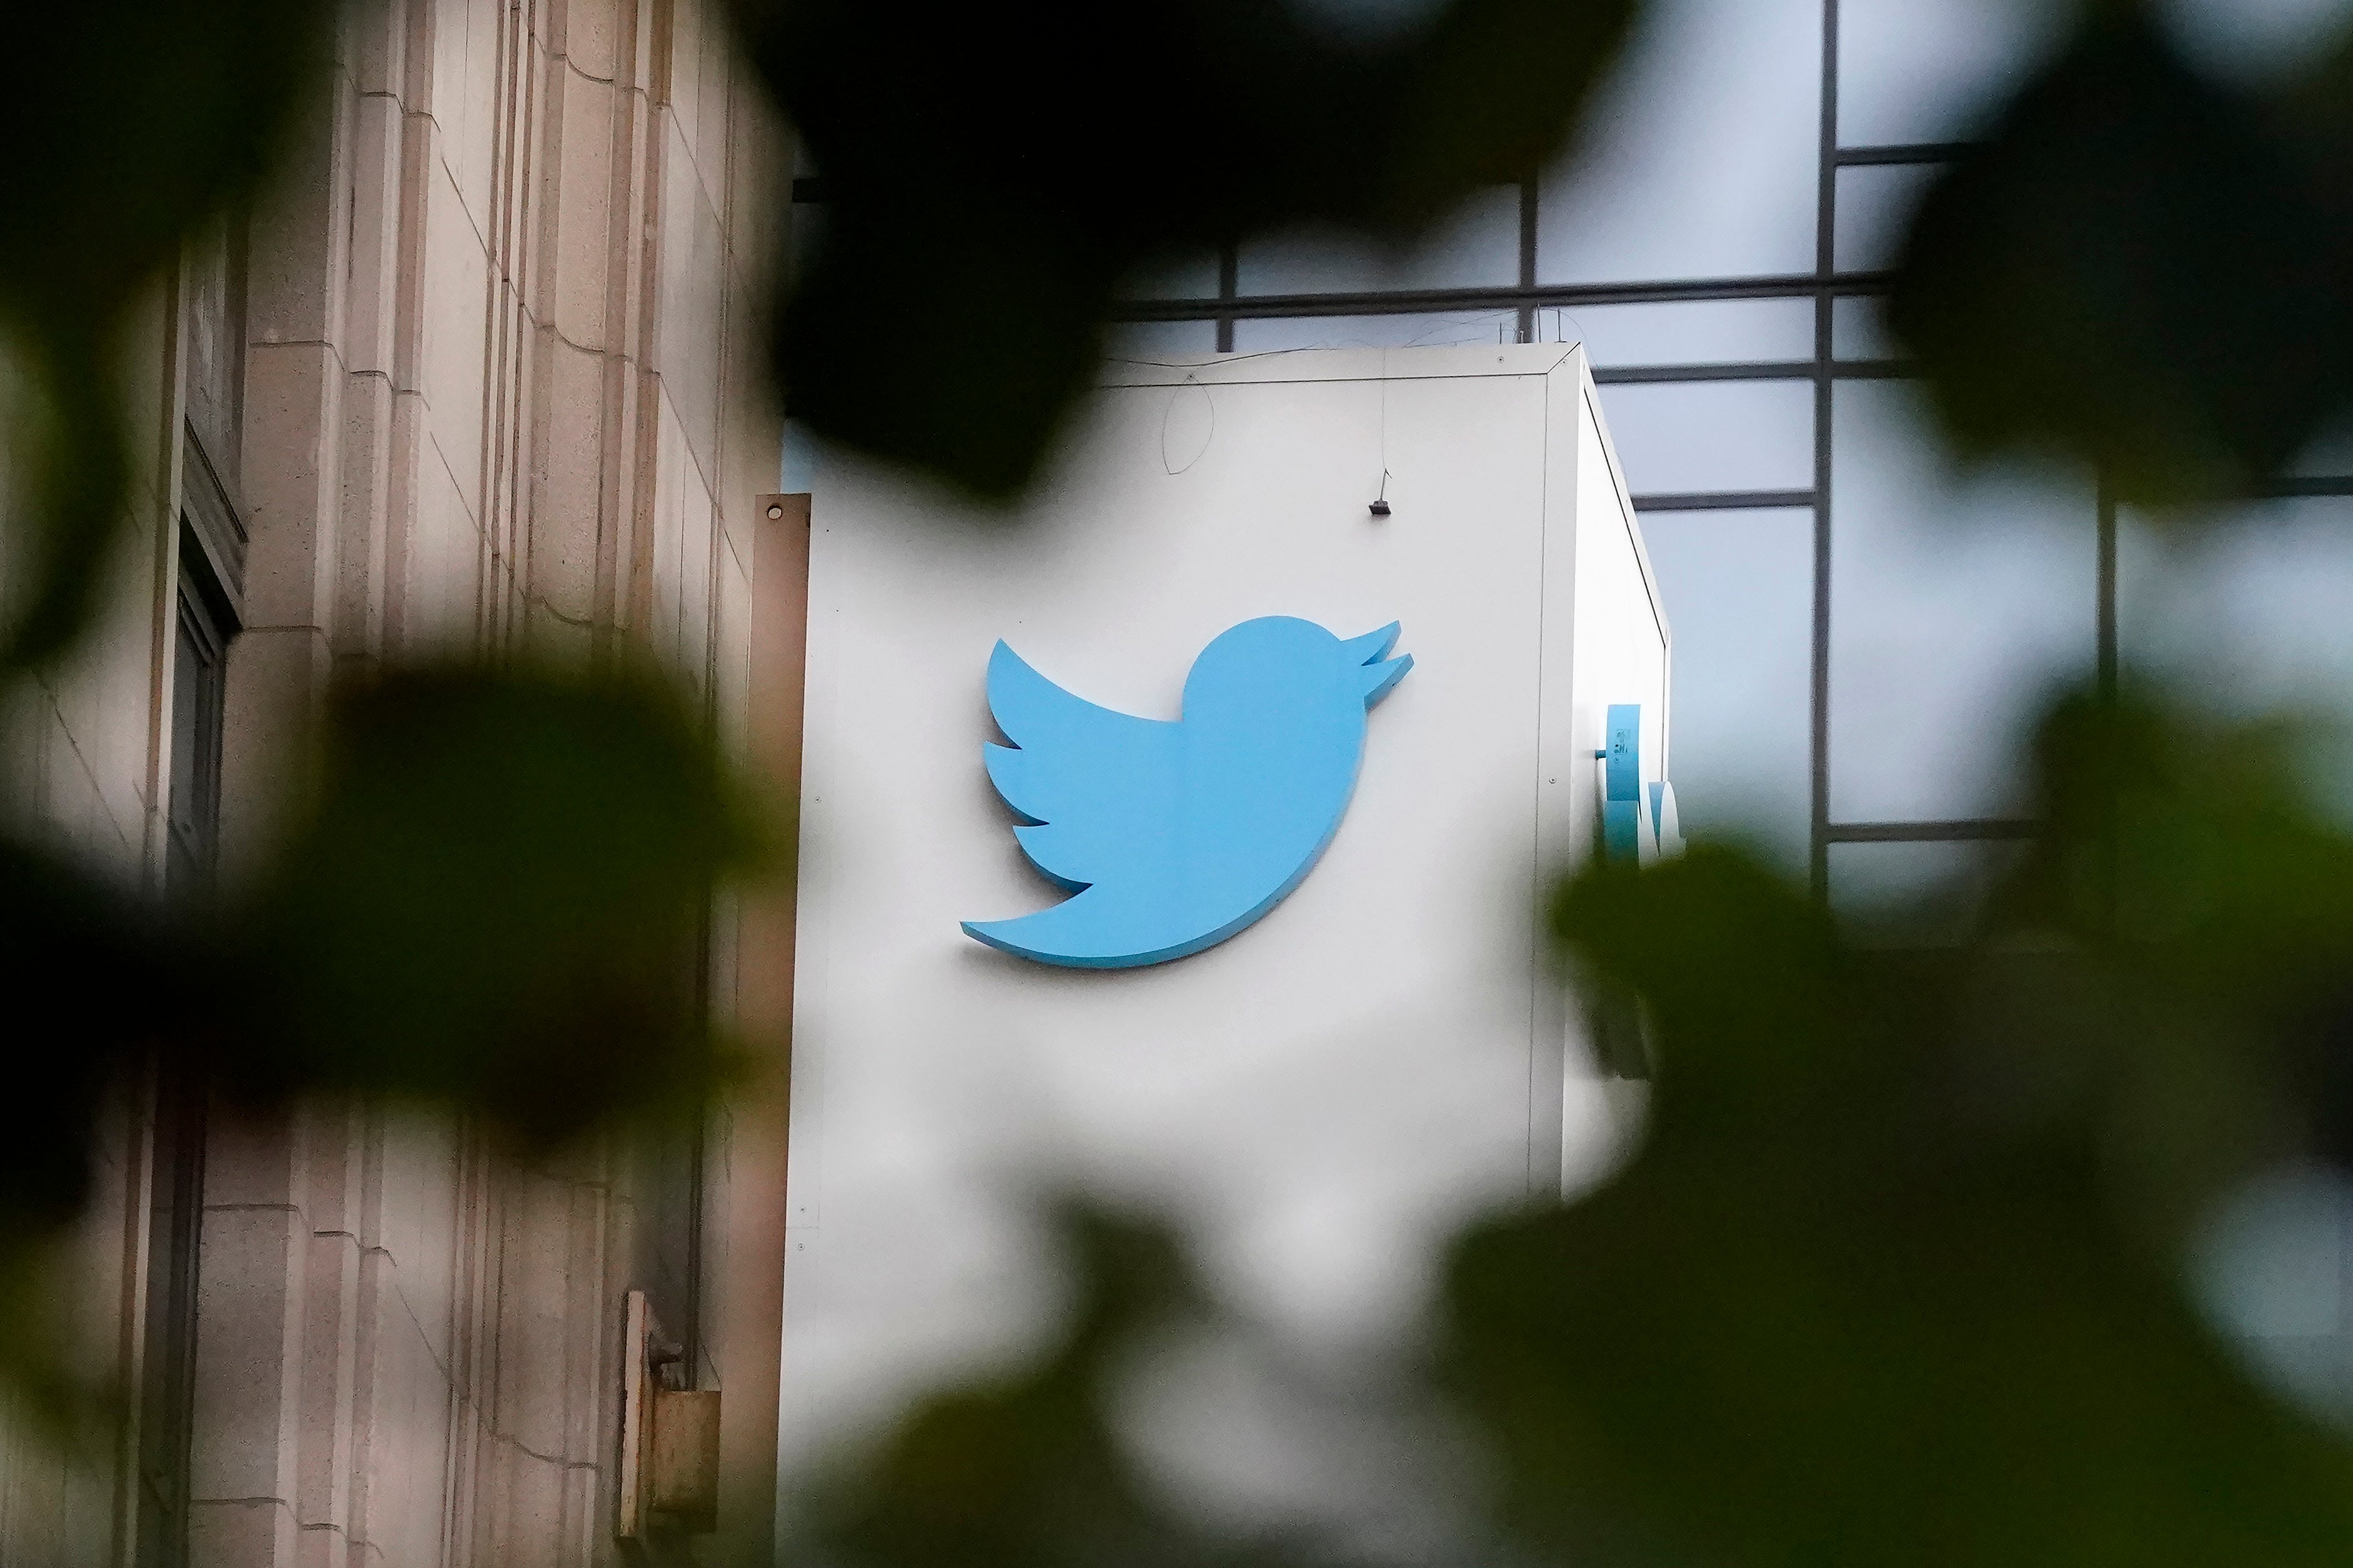 Twitter ad sales down by more than half since Elon Musk takeover, report claims | The Independent